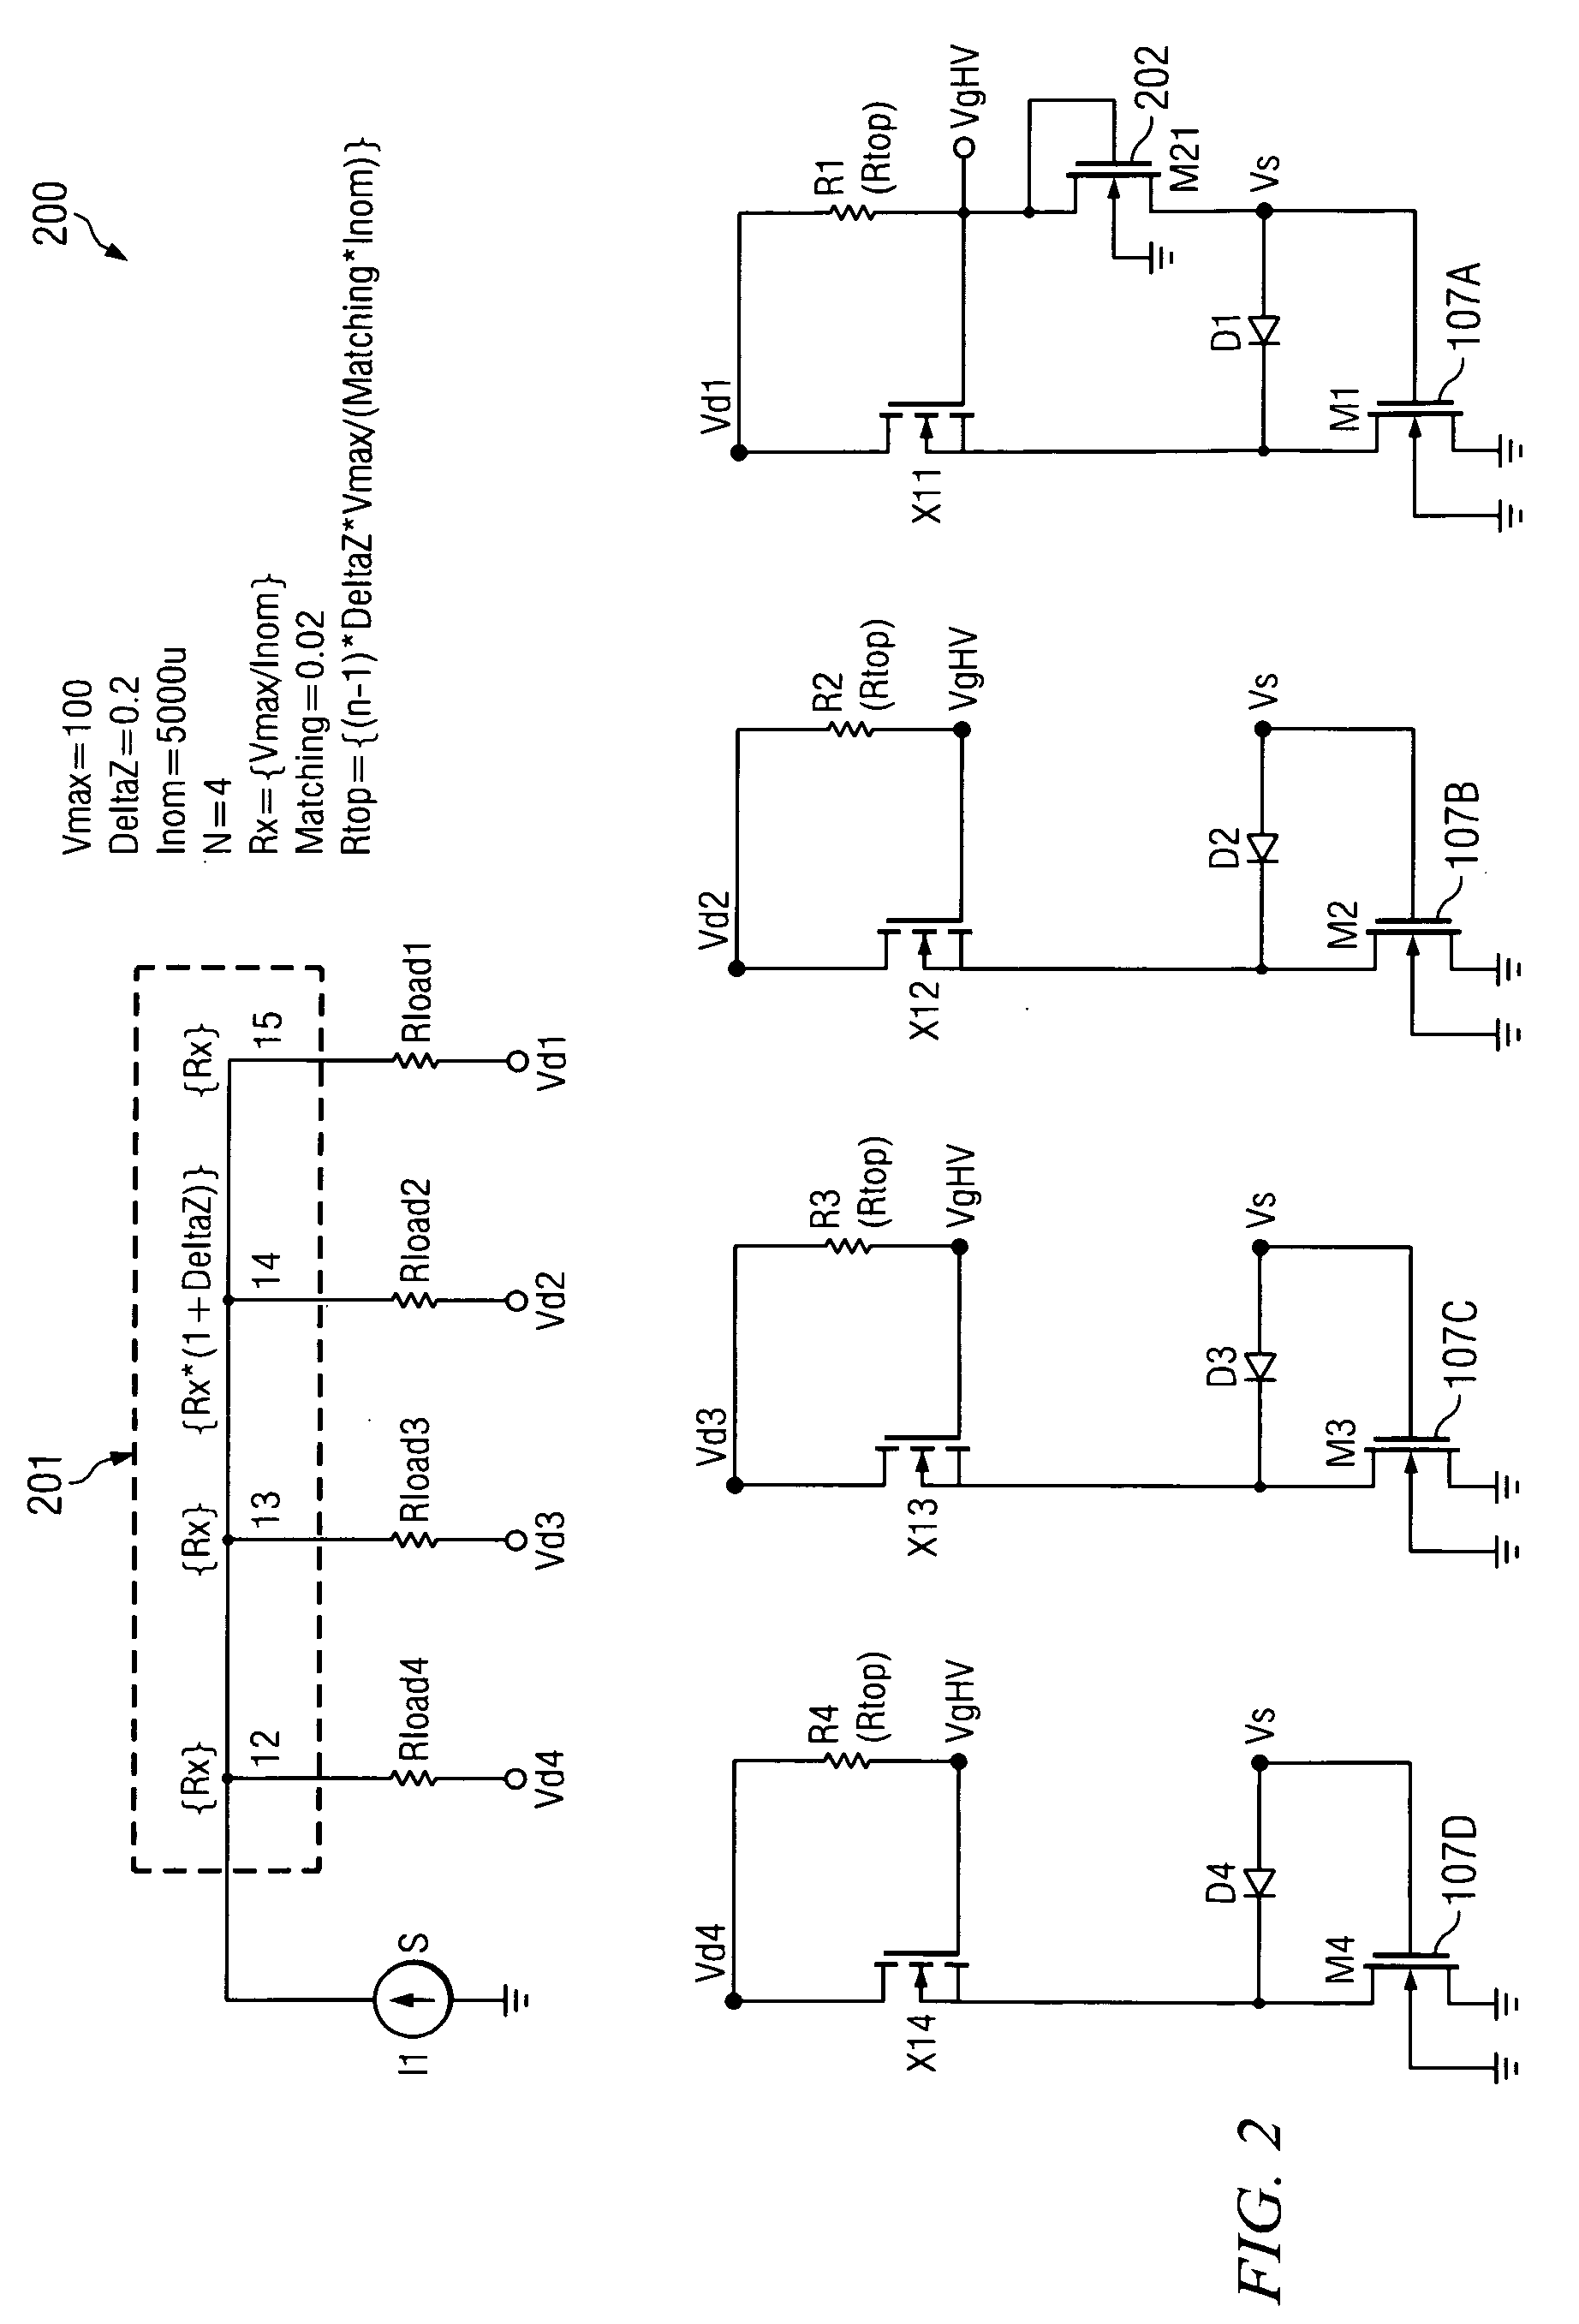 High voltage current splitter circuit and method